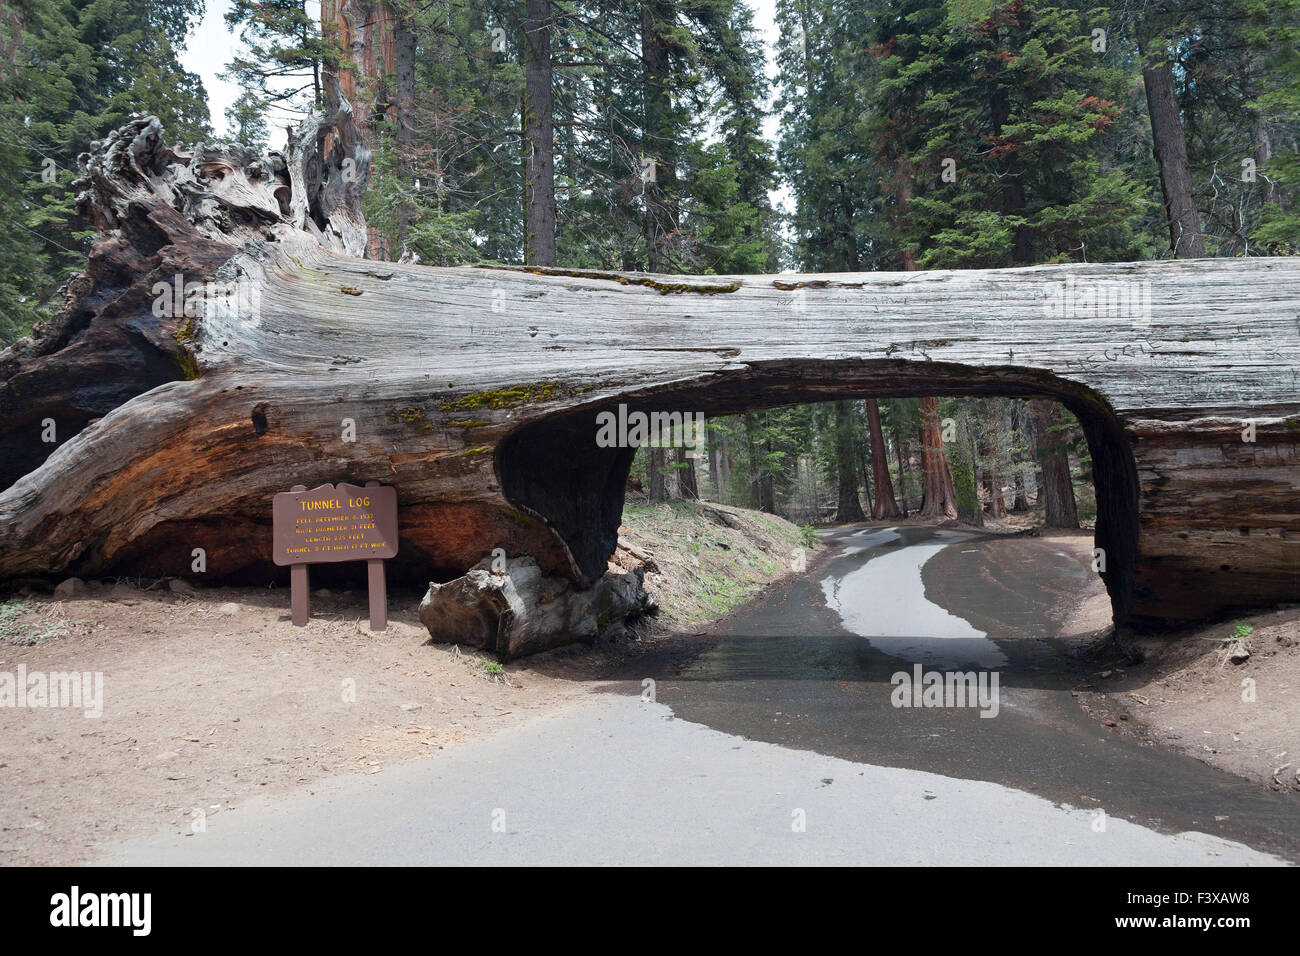 Tunnel log in the Sequoia park Stock Photo